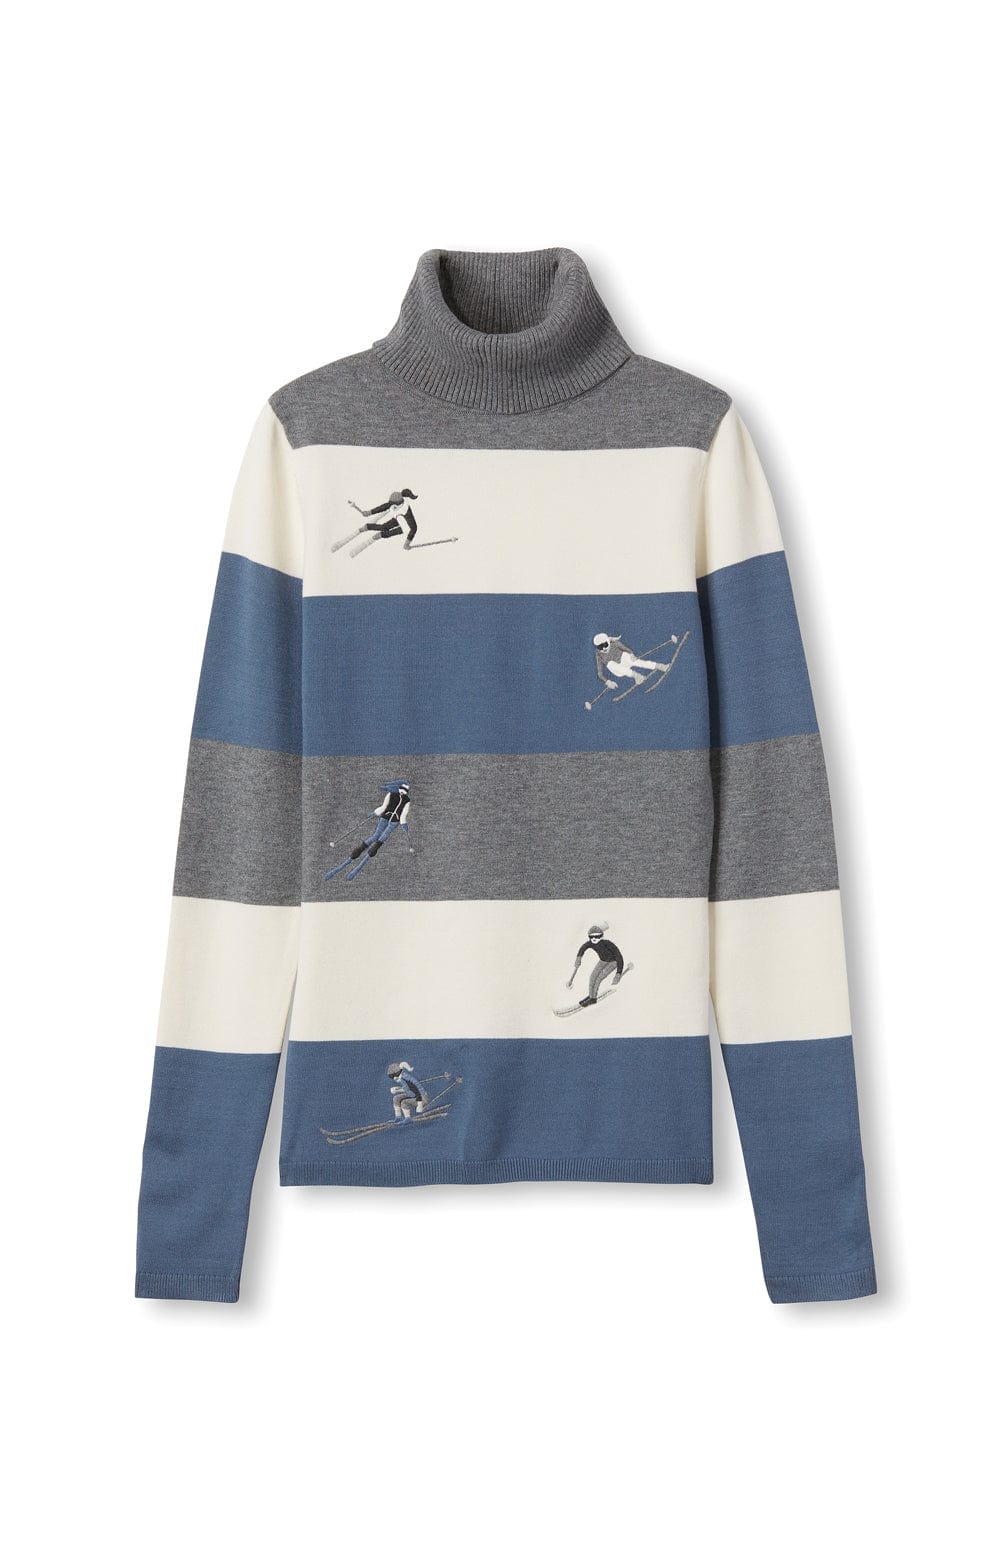 ANR Womens Sweater Avery Sweater | Heather Blue